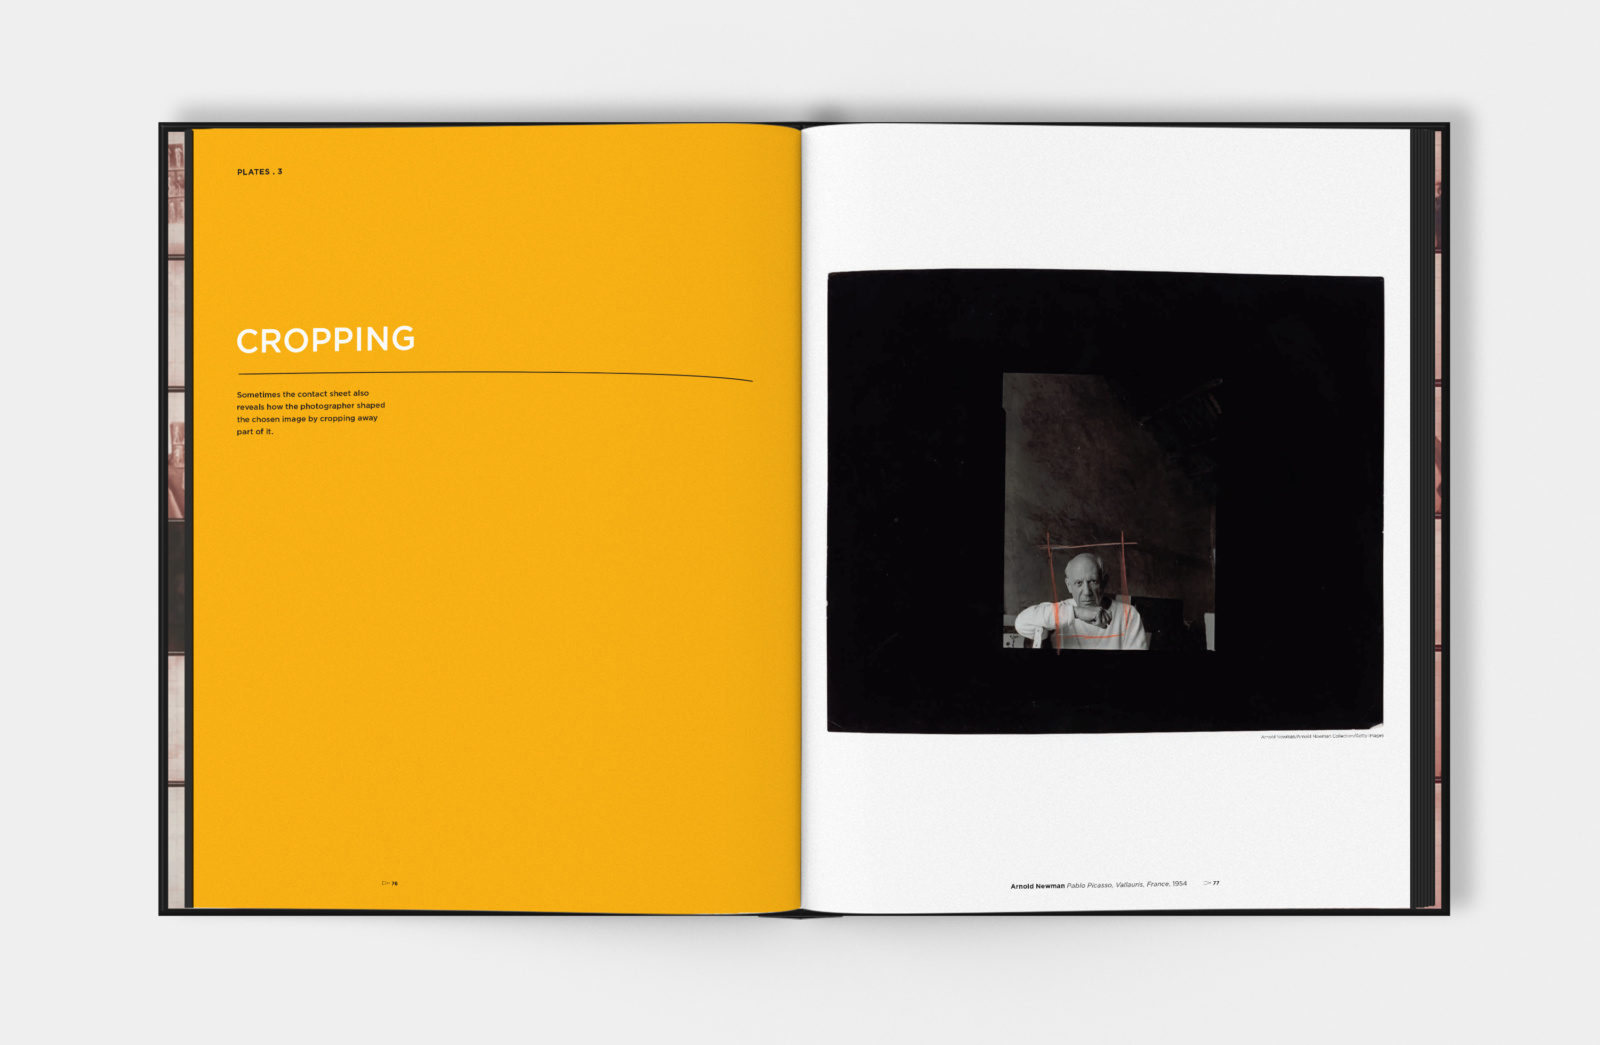 PROOF book design chapter spread, showing the "Cropping" chapter and featuring a photograph of Pablo Picasso